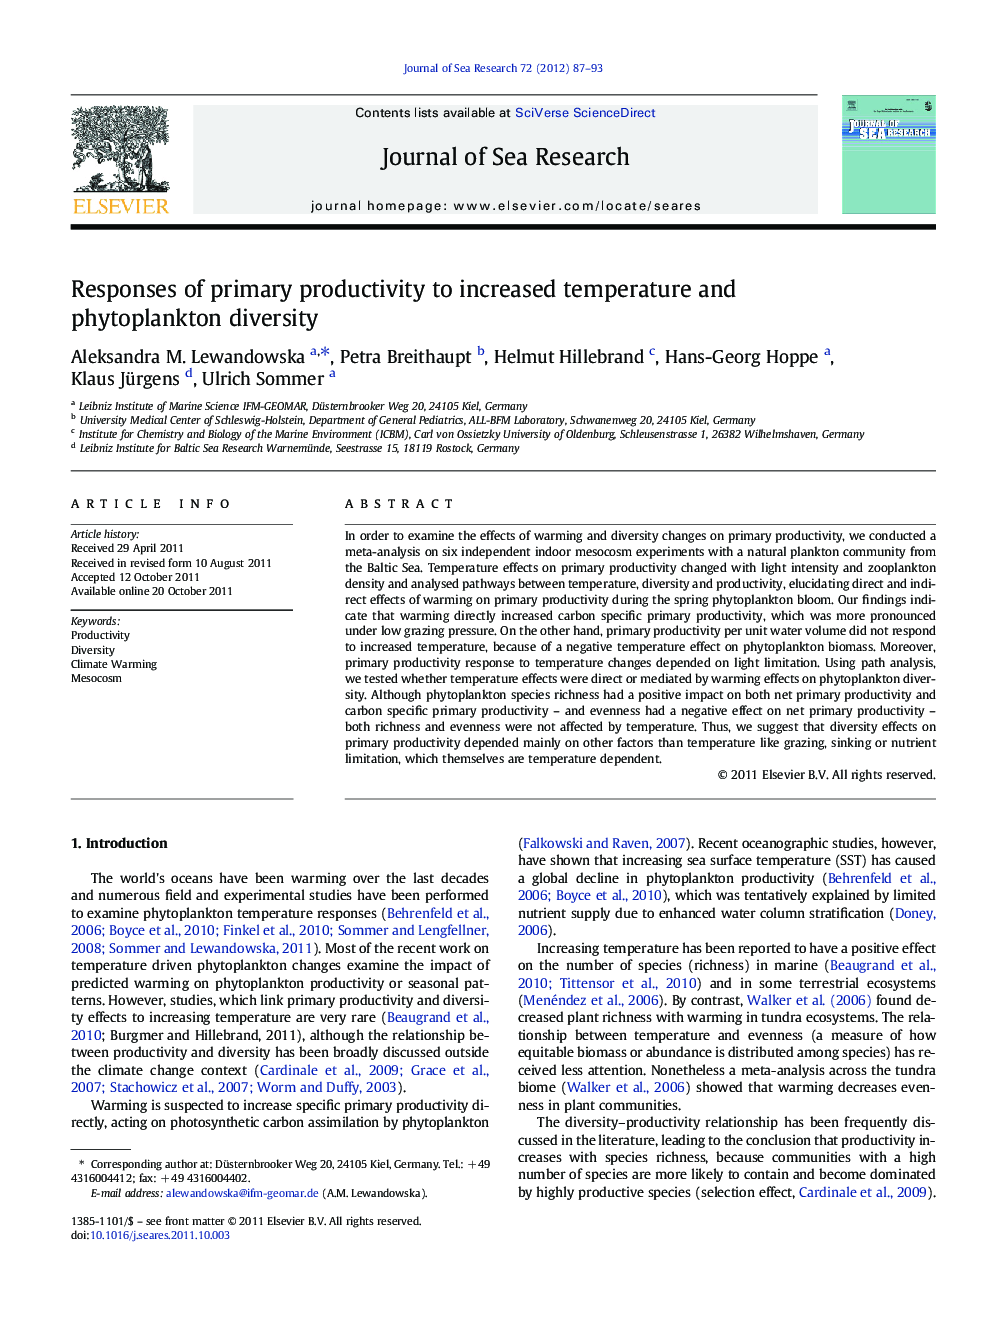 Responses of primary productivity to increased temperature and phytoplankton diversity